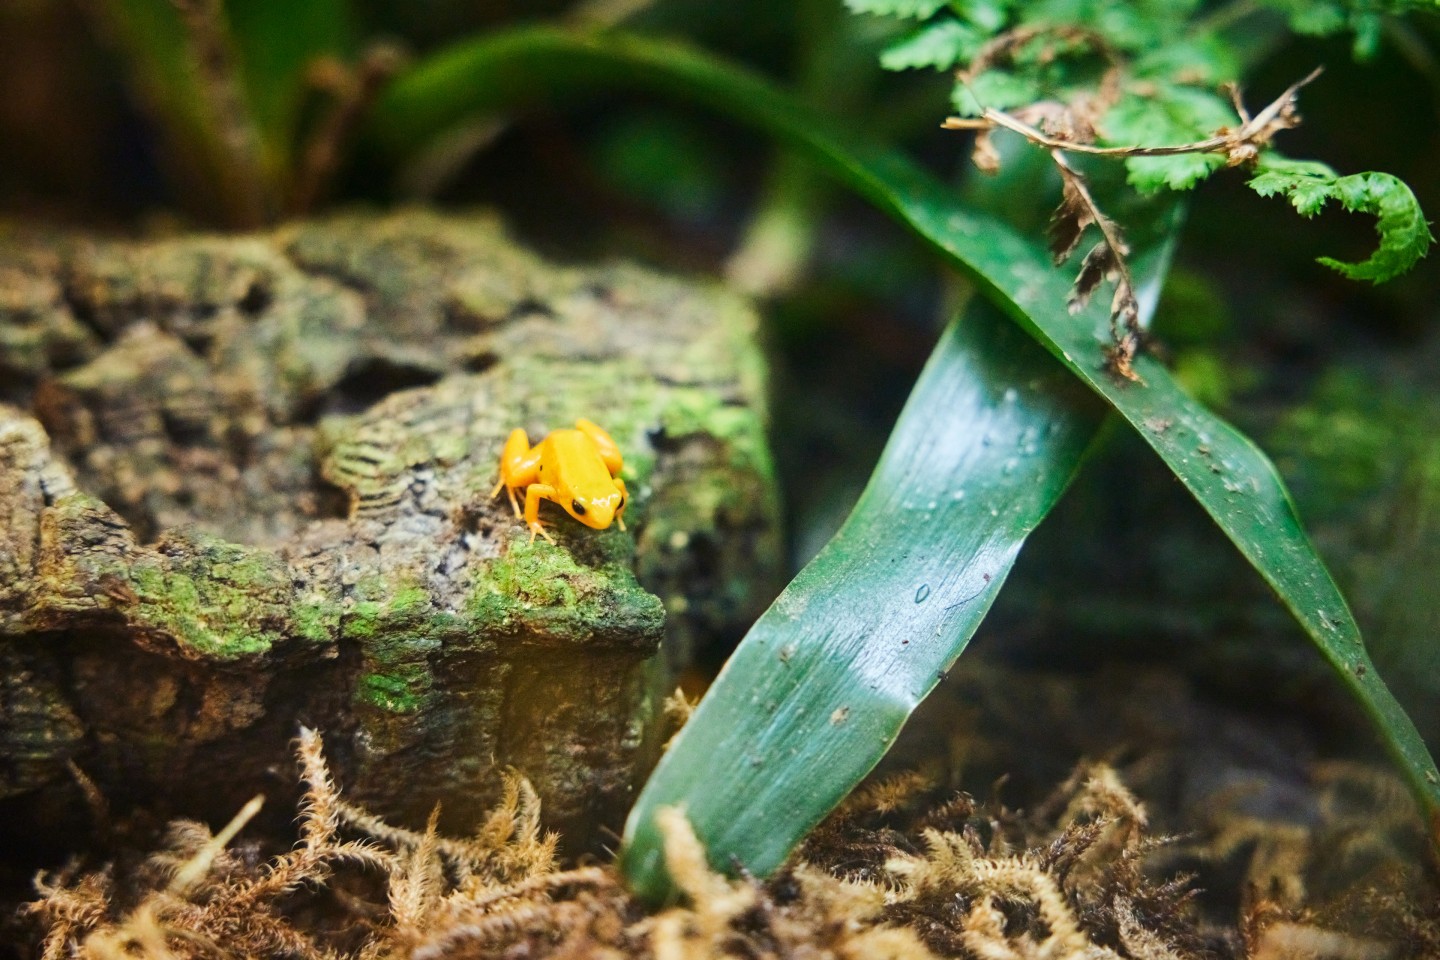 A yellow frog sat on a rock in the university's Amphibian Conservation Research facility